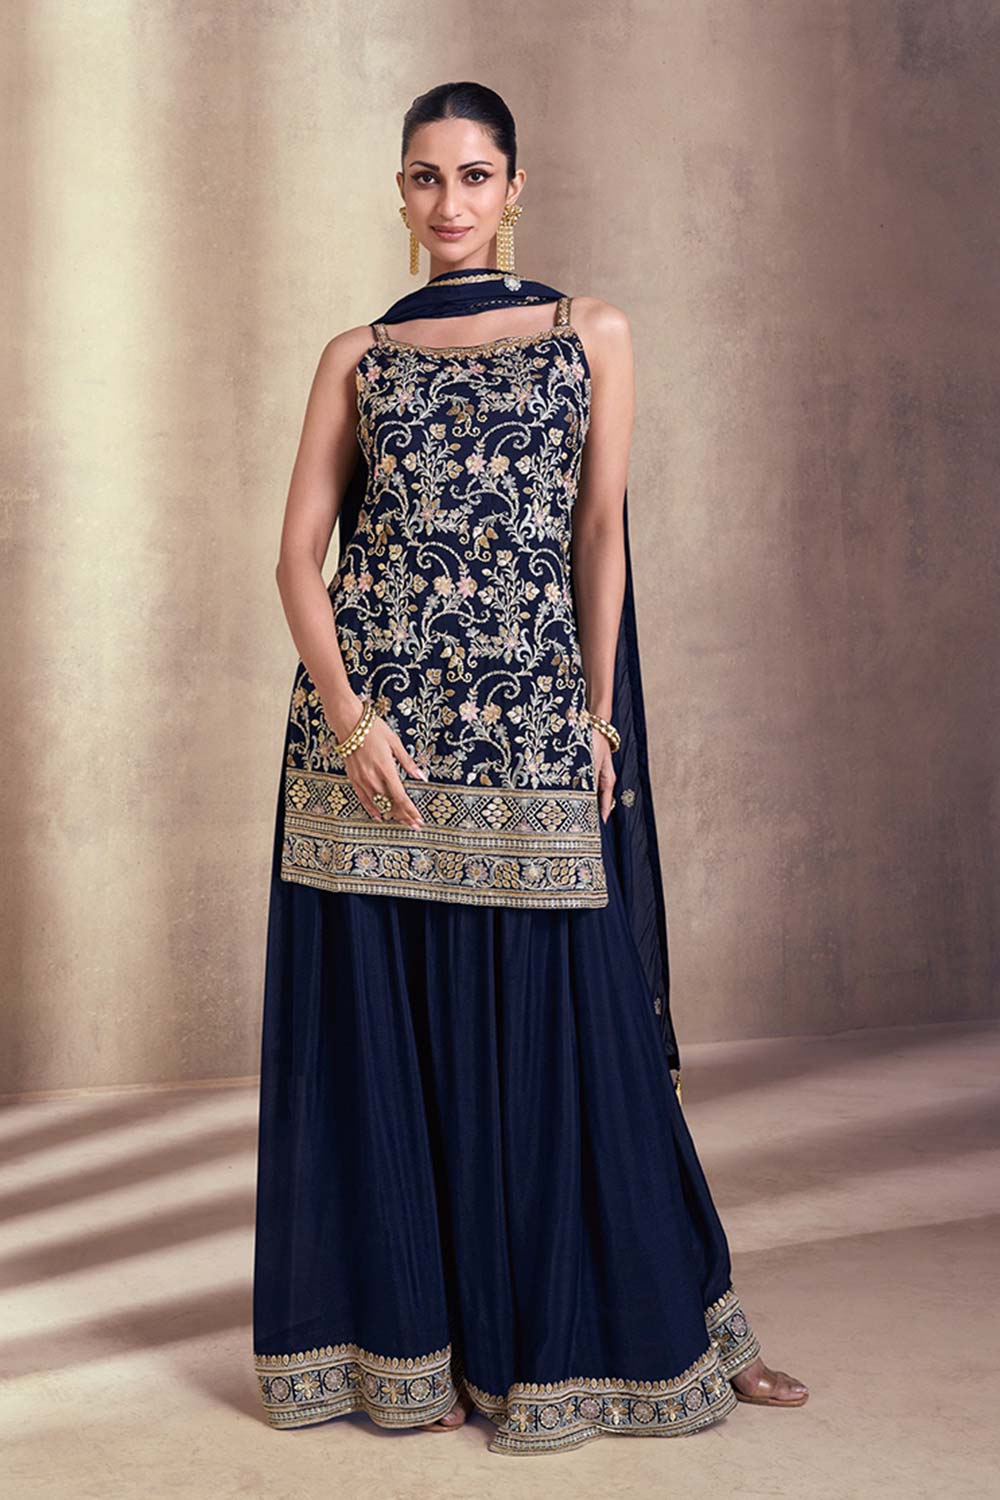 Navy blue embroidered sharara for women